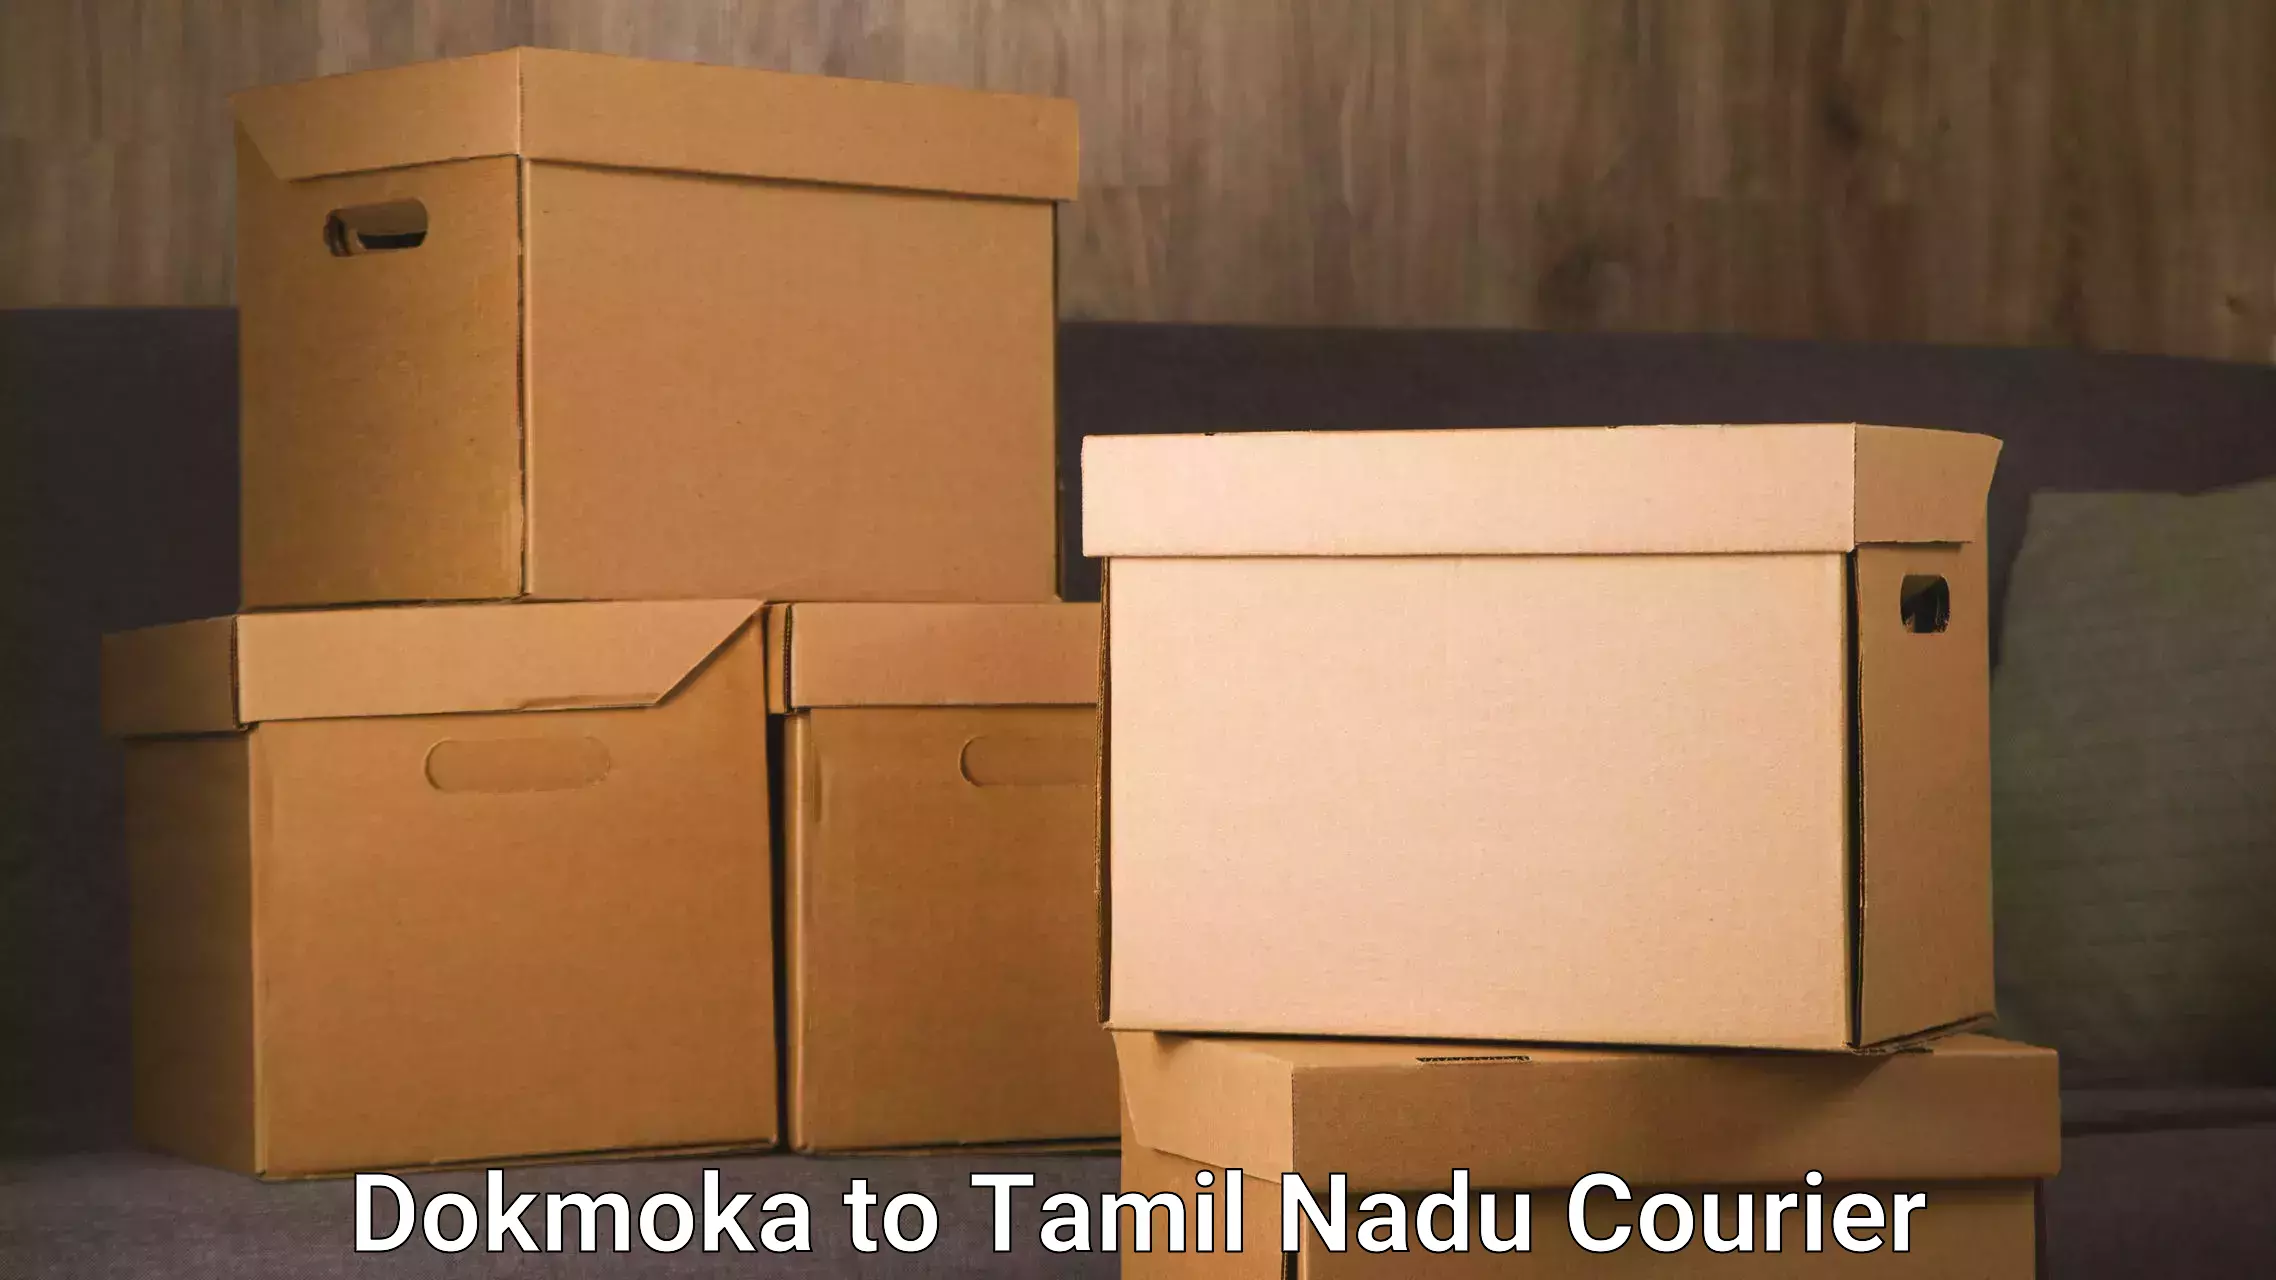 Reliable parcel services in Dokmoka to Ennore Port Chennai